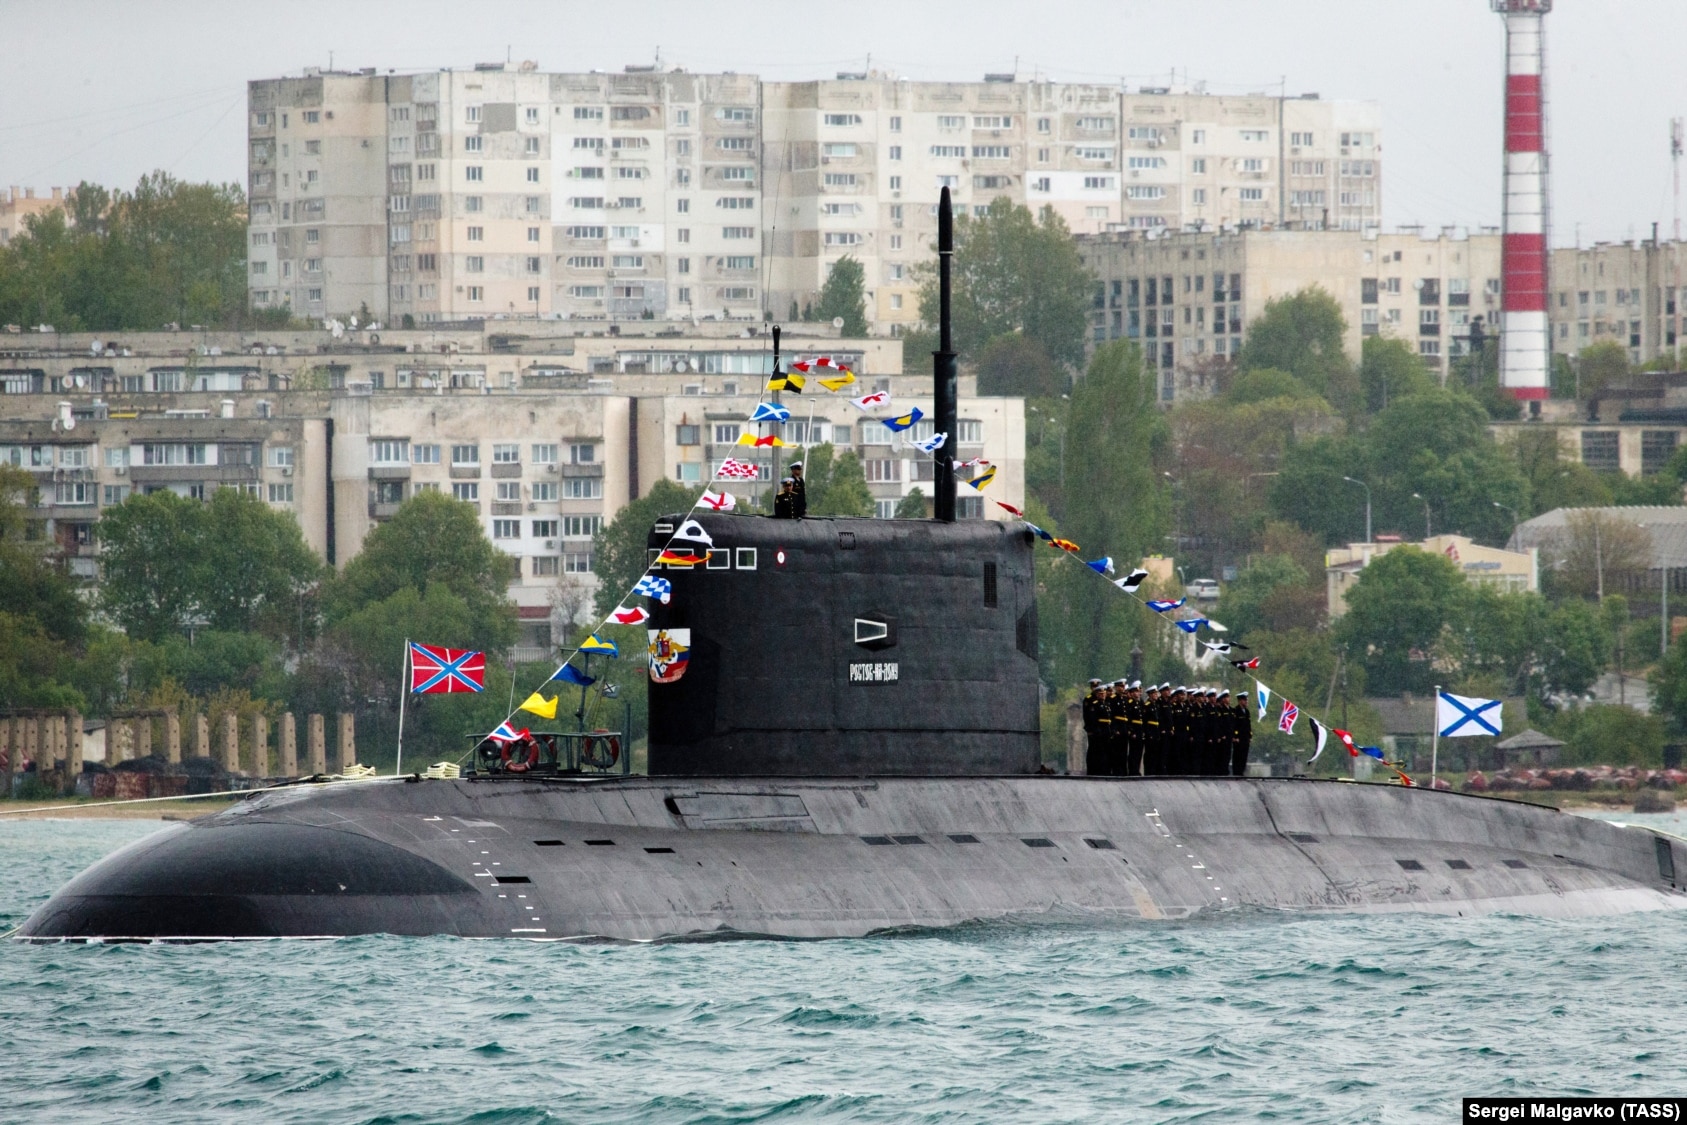 The Rostov-on-Don diesel-electric submarine is seen off the coast of Sevastopol in May 2020.&nbsp;&nbsp;&nbsp; &nbsp; The Rostov-on-Don, which was launched in 2014, was also struck in the September 2023 strike on the Sevastopol naval base. The sub was severely damaged and will either be out of service for an extended period or scrapped.&nbsp;&nbsp; &nbsp; The sub was filmed in December 2015 firing a barrage of Kalibr cruise missiles at what the Russian military described as Islamic State targets in Syria.&nbsp;&nbsp;&nbsp; 